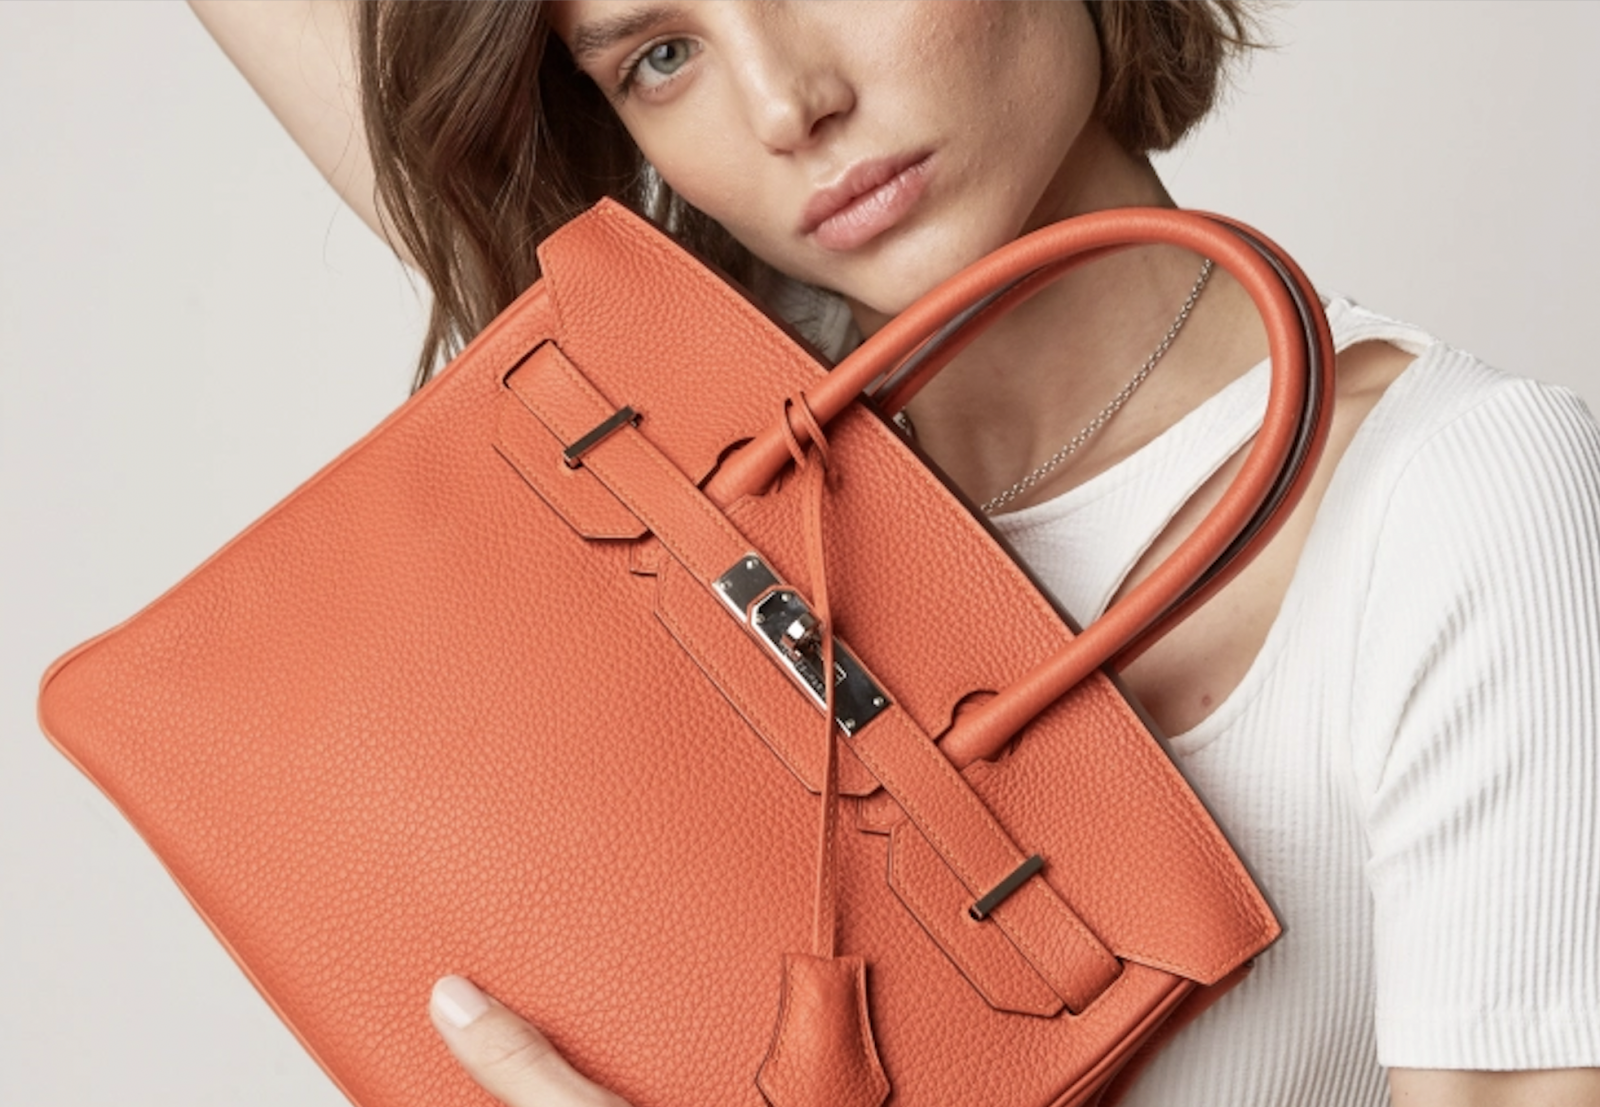 JPO Appeal Board Rejects Hermes Packaging Colors – MARKS IP LAW FIRM